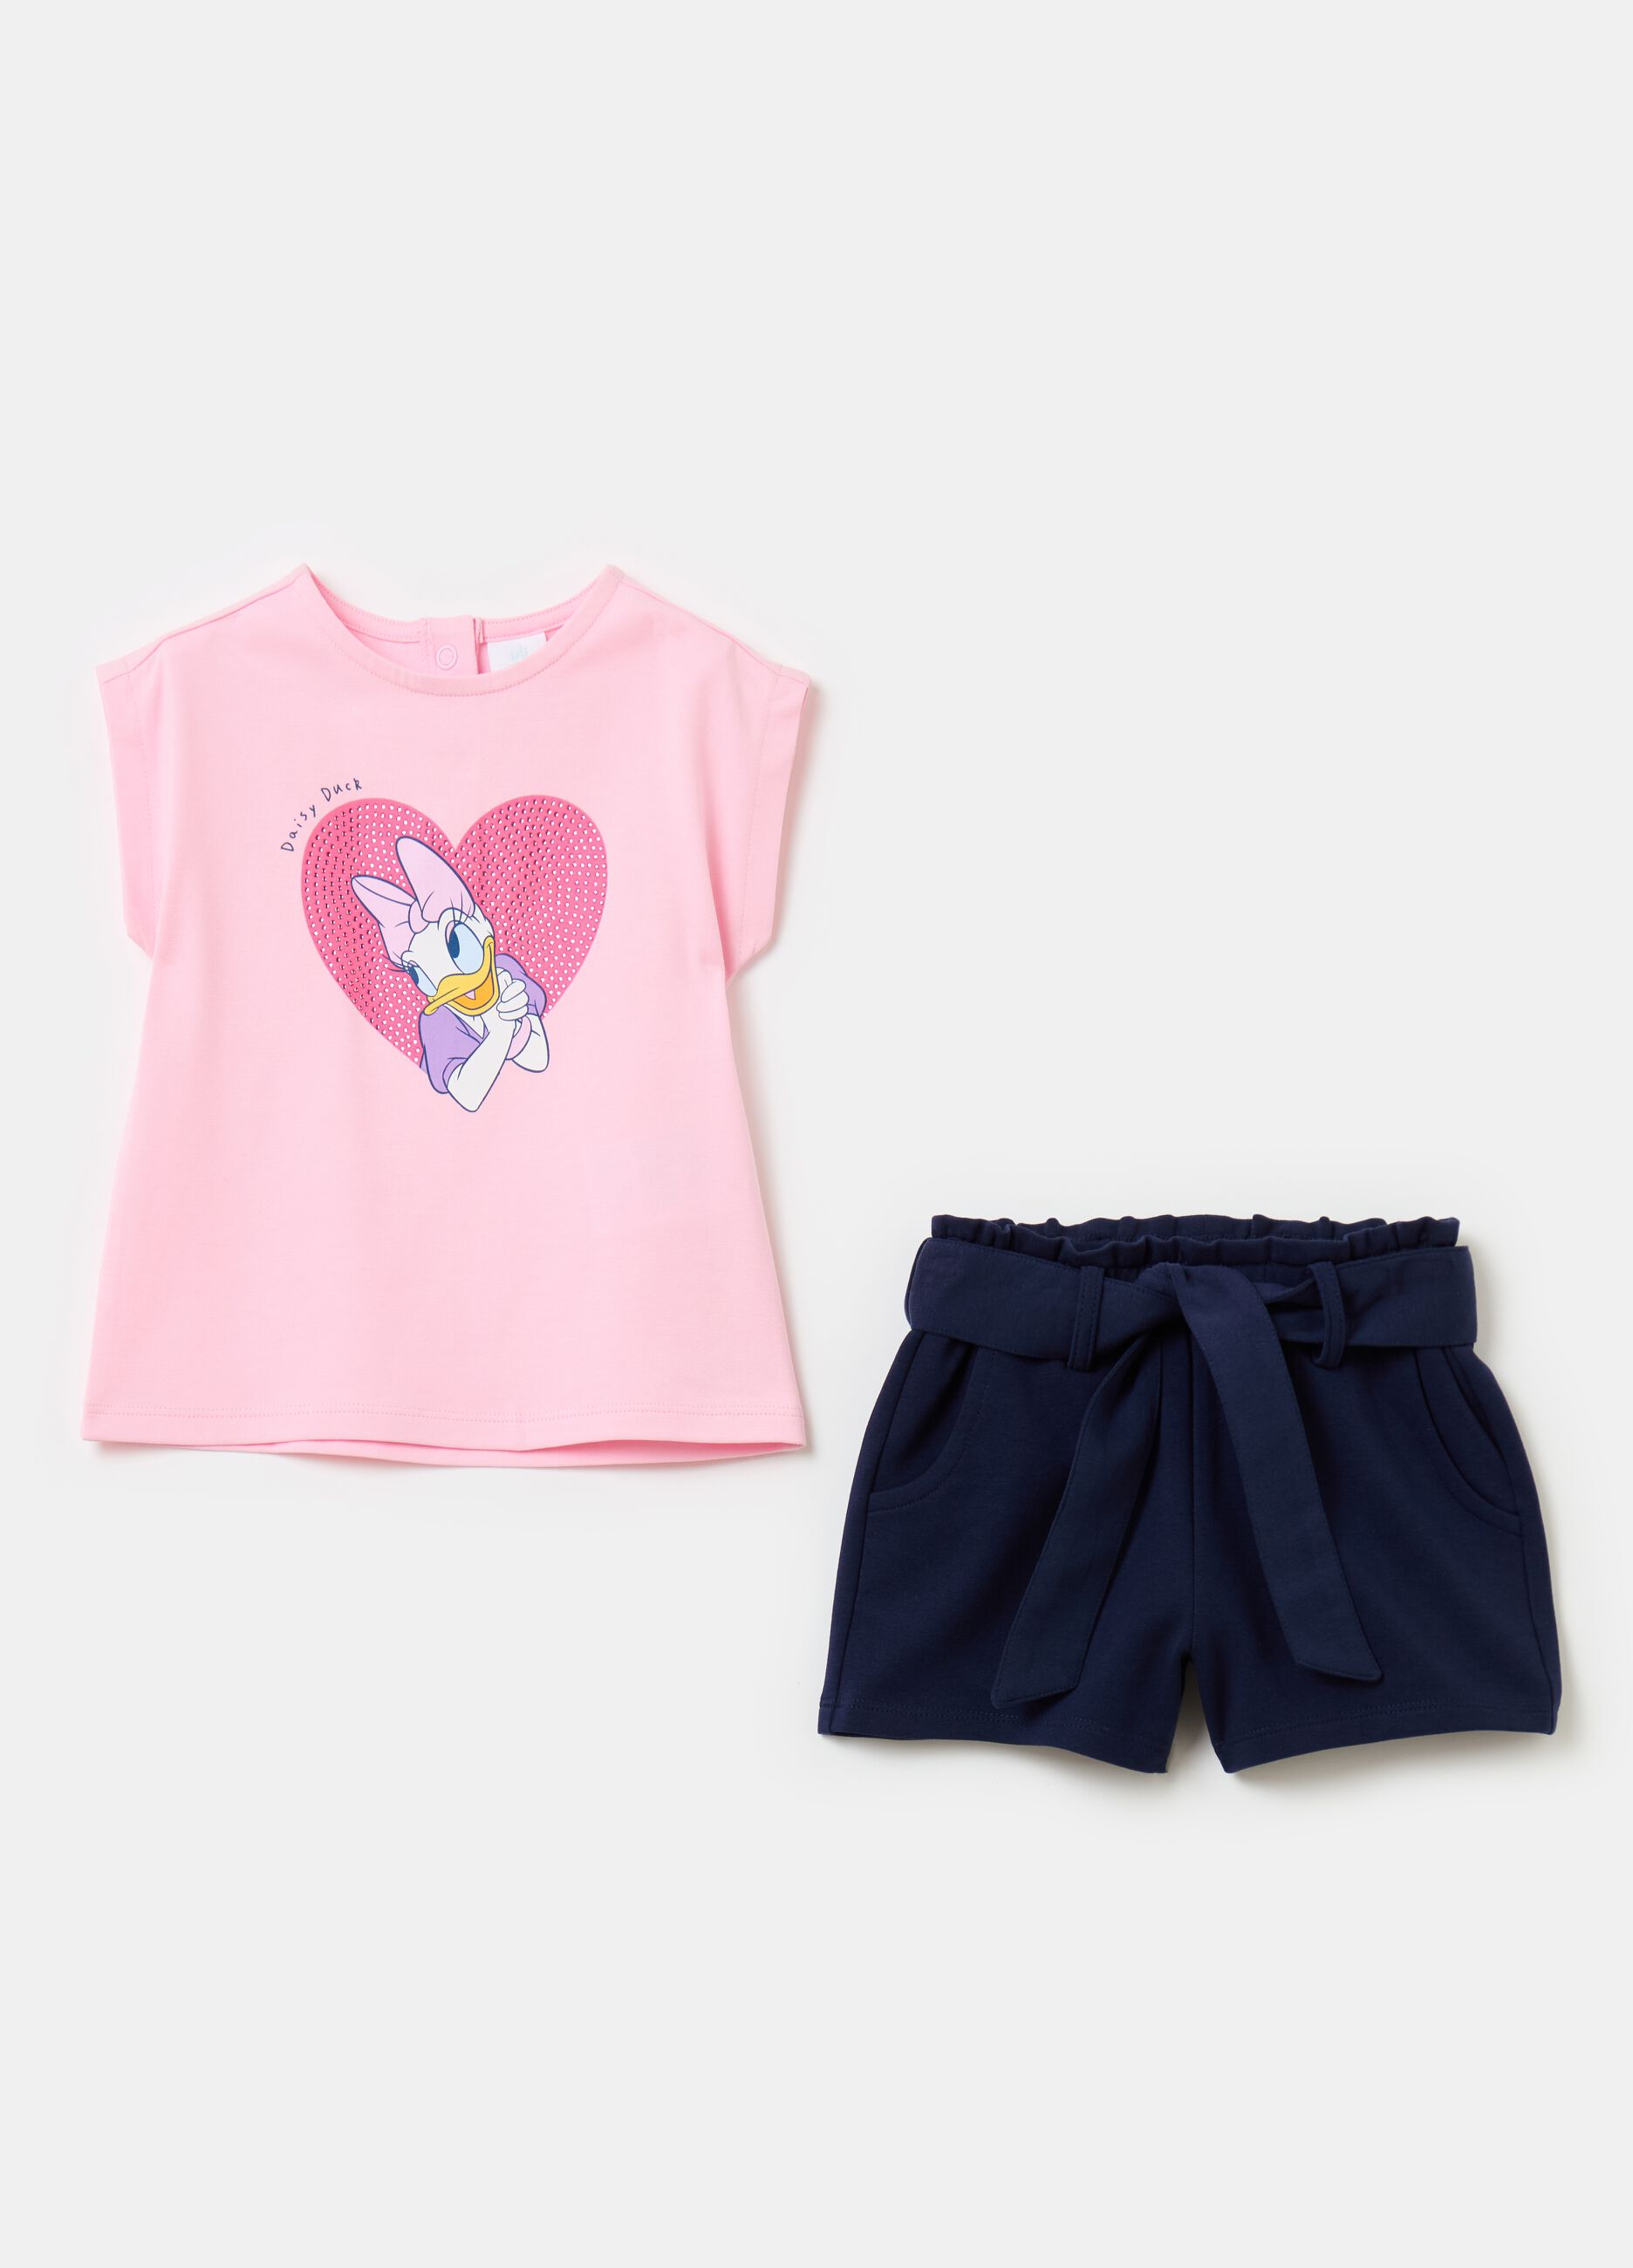 Jogging set with Donald Duck 90 print